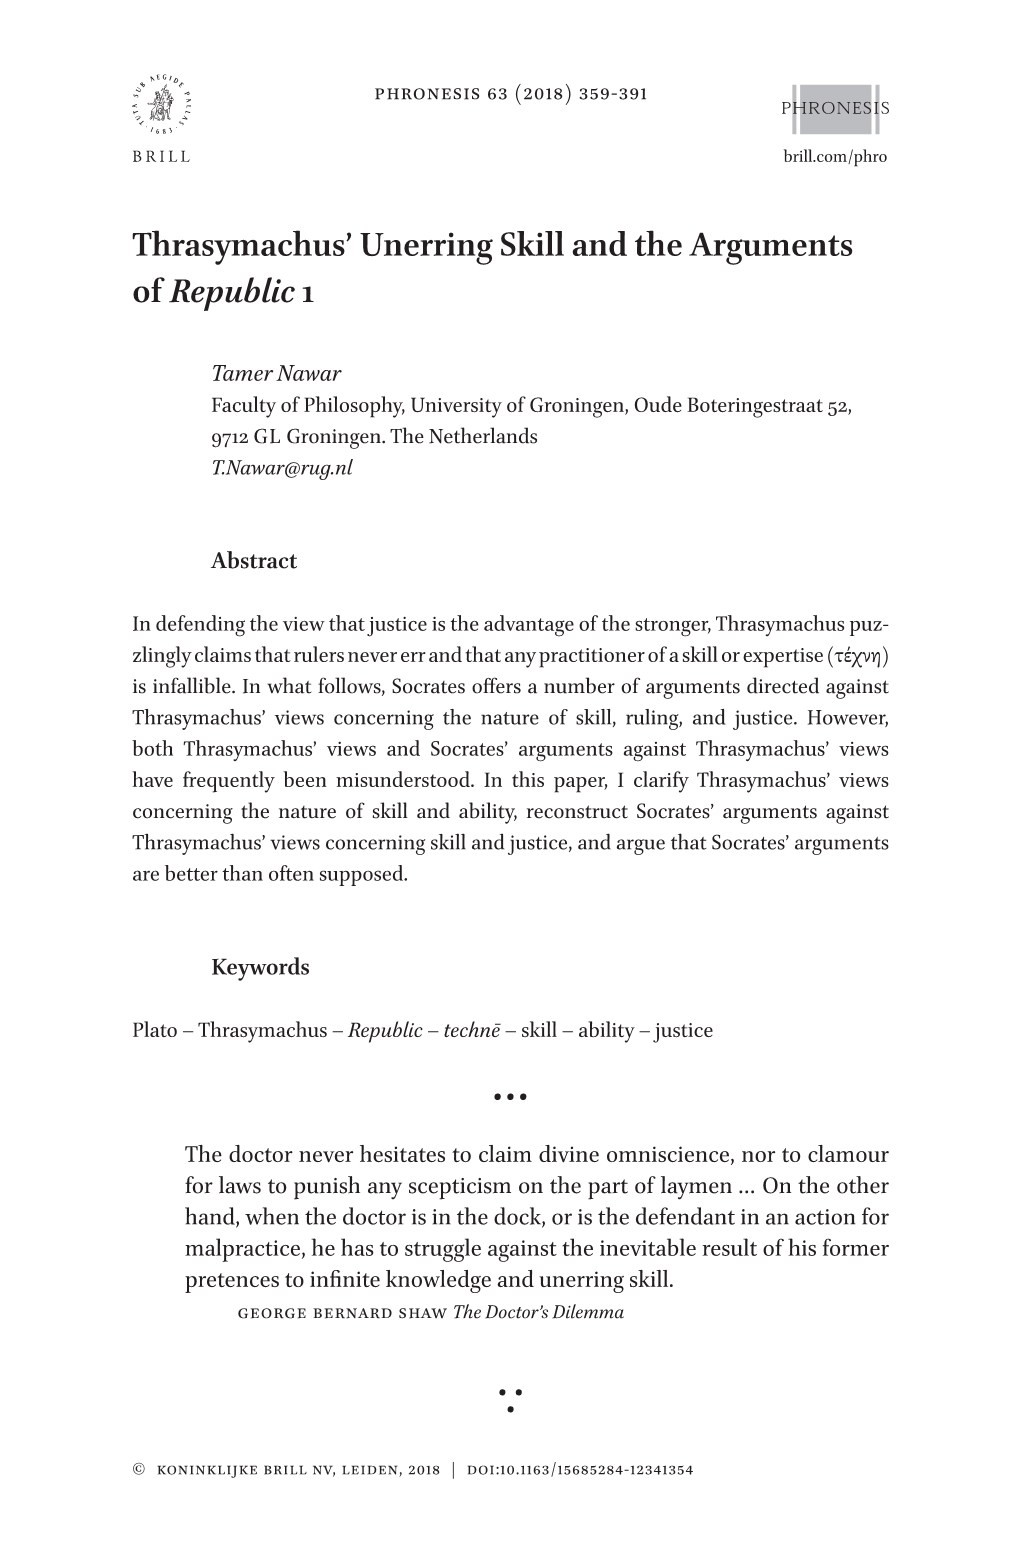 Thrasymachus' Unerring Skill and the Arguments of Republic 1